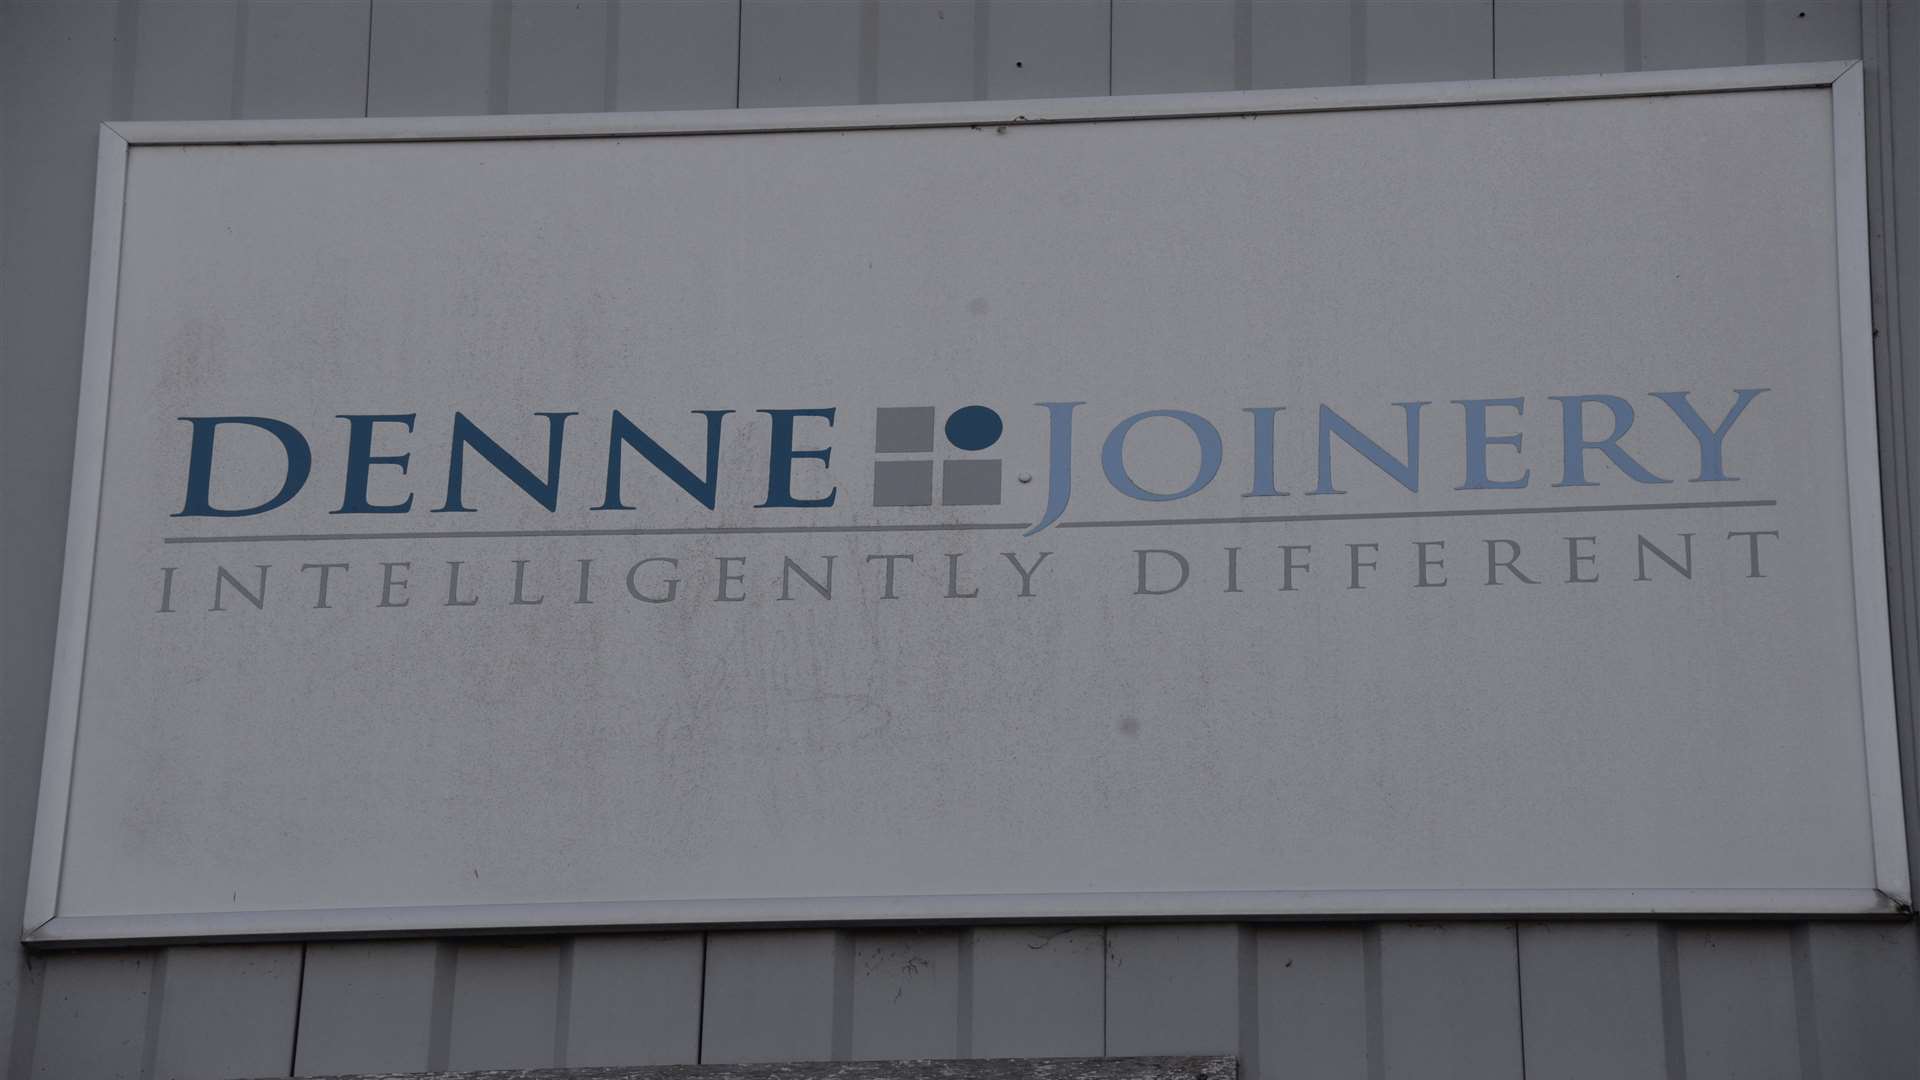 Denne Joinery is based in Bramling, near Canterbury